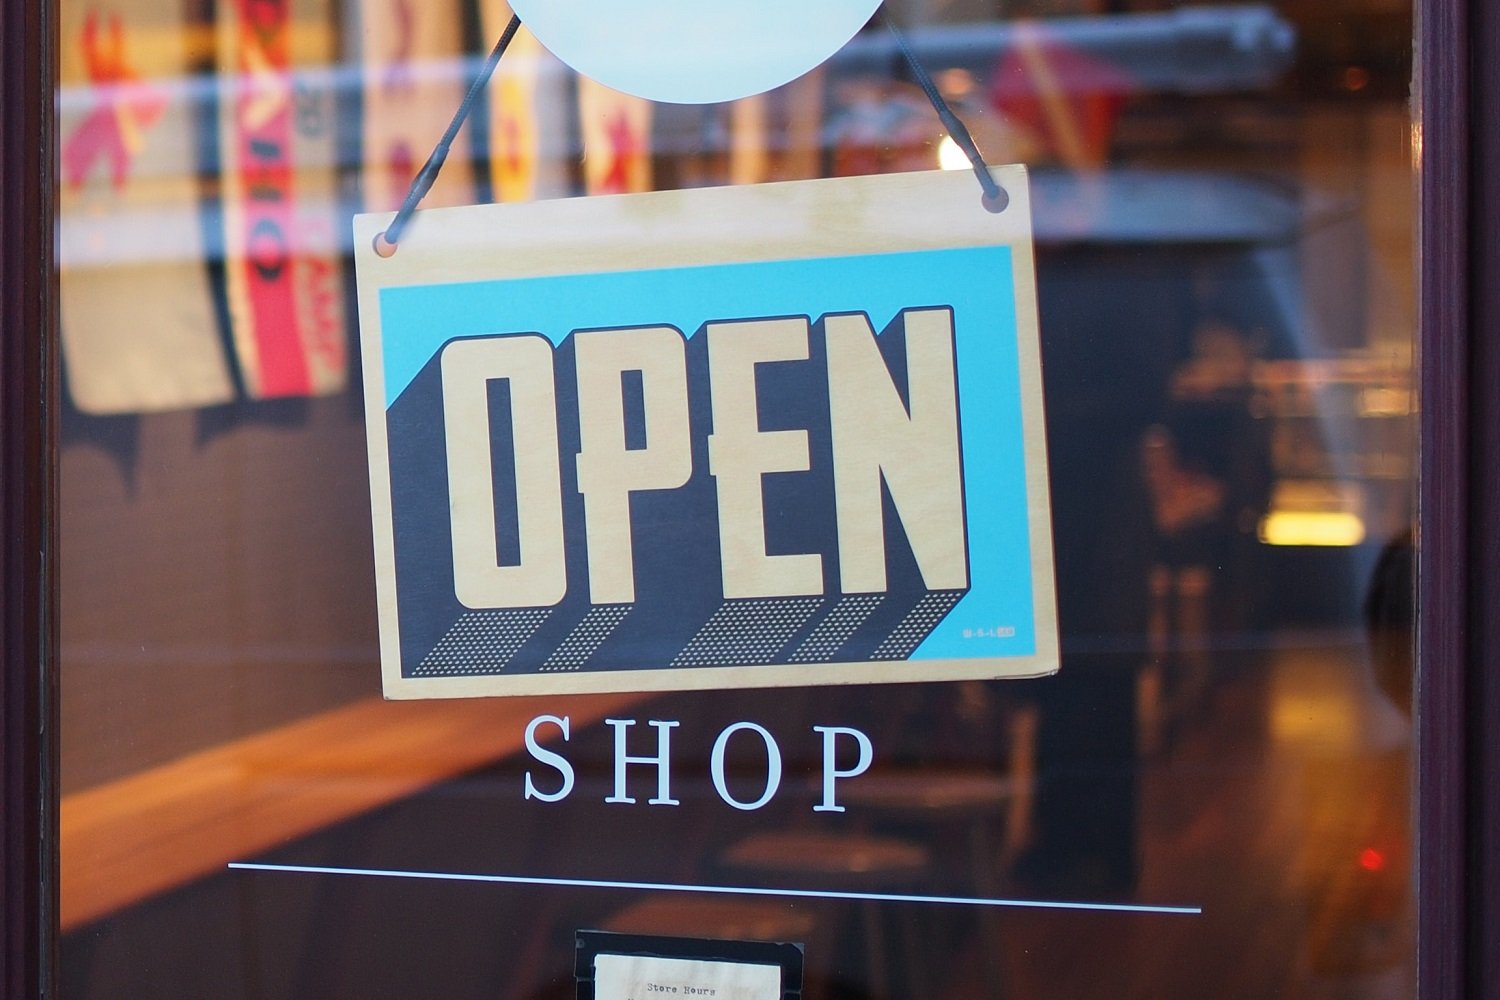 7 Ways Local Businesses Can Get More Visibility (Without Breaking the Bank)